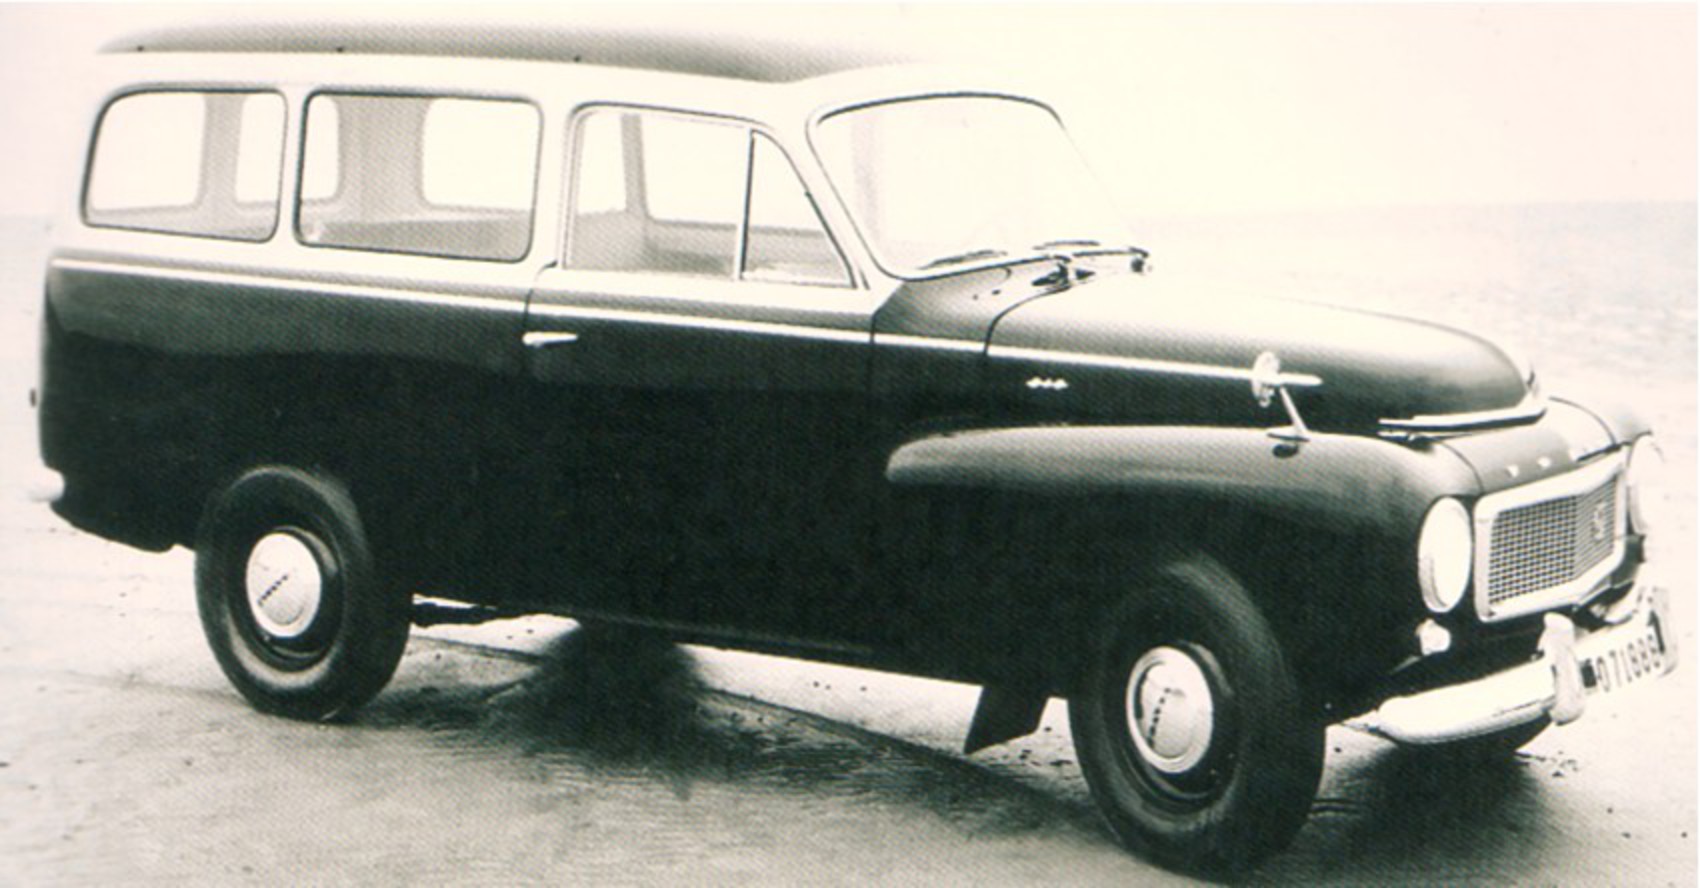 Volvo PV445 wagon. View Download Wallpaper. 850x444. Comments